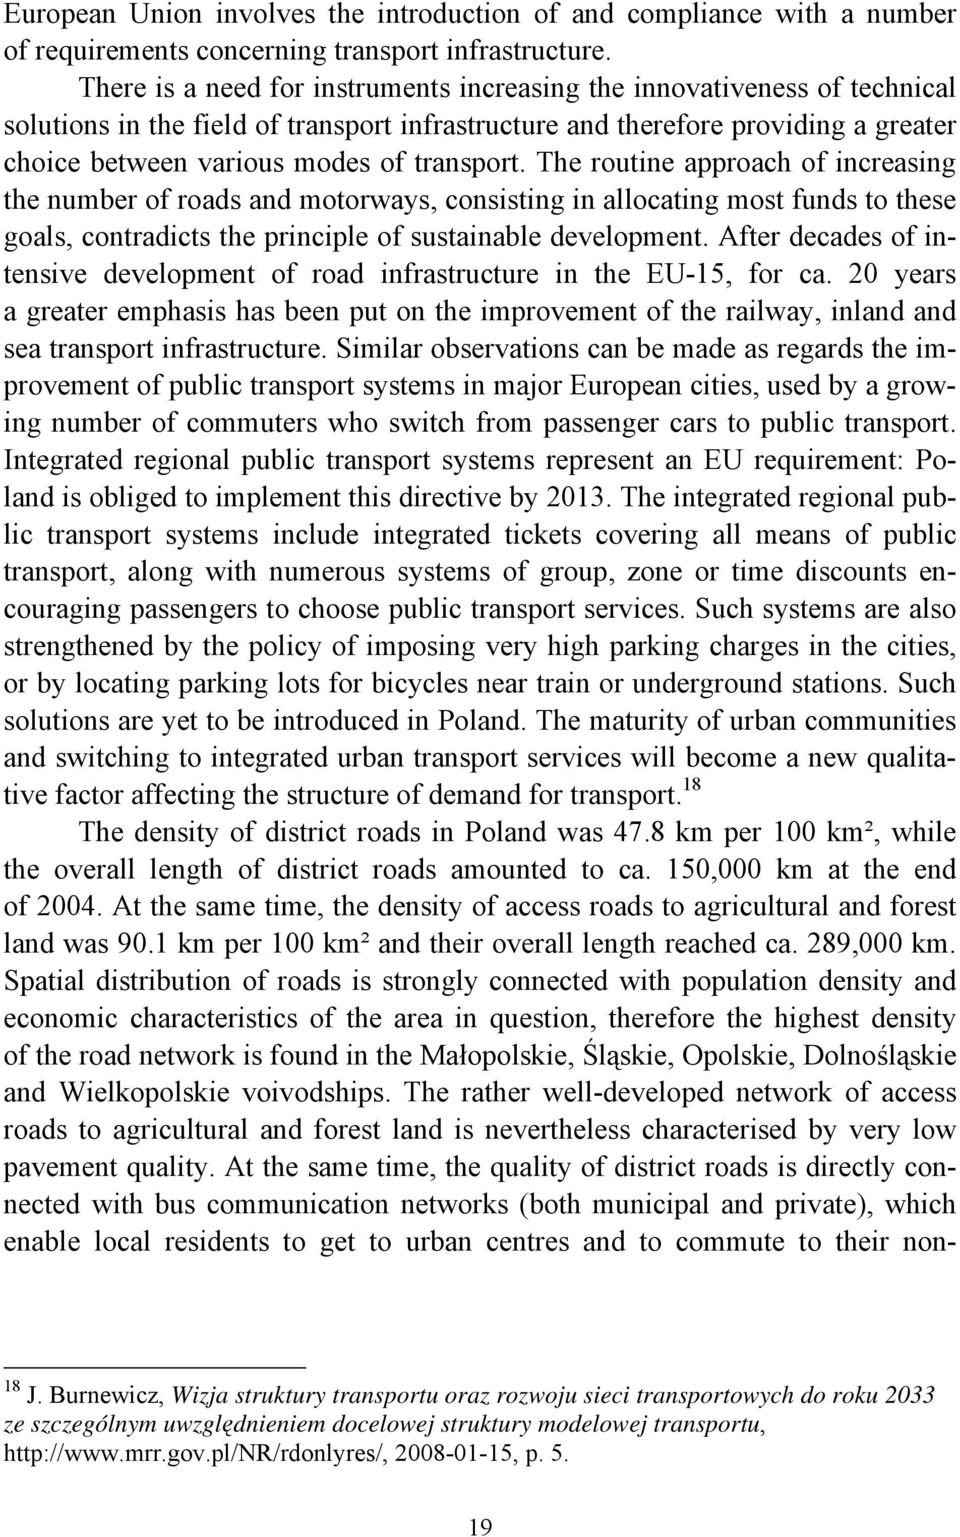 transport. The routine approach of increasing the number of roads and motorways, consisting in allocating most funds to these goals, contradicts the principle of sustainable development.